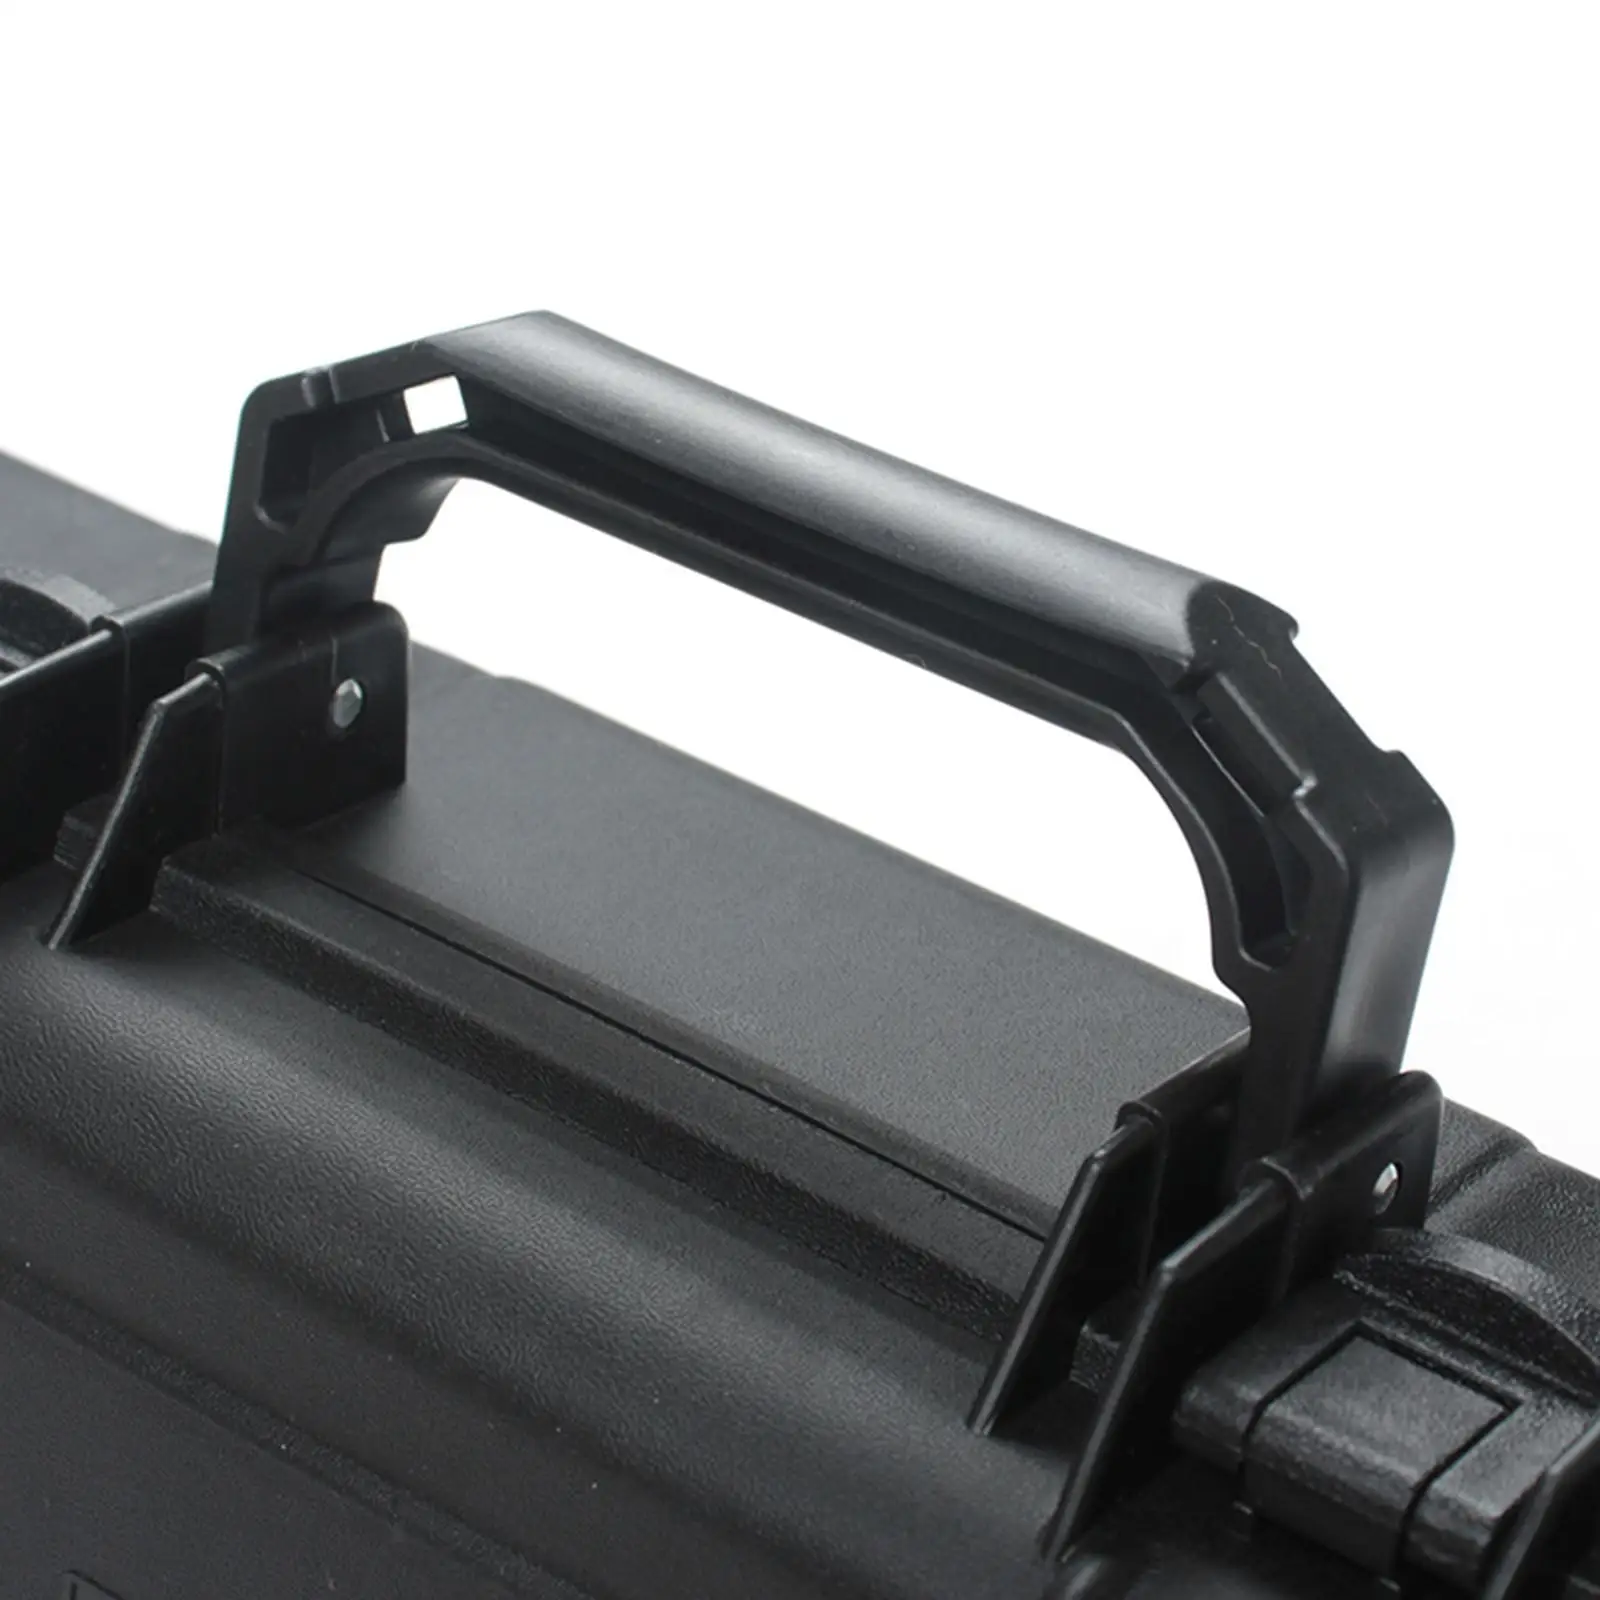 Equipment Tool Box Impact Resistant Dustproof Portable Safety Carrying Case